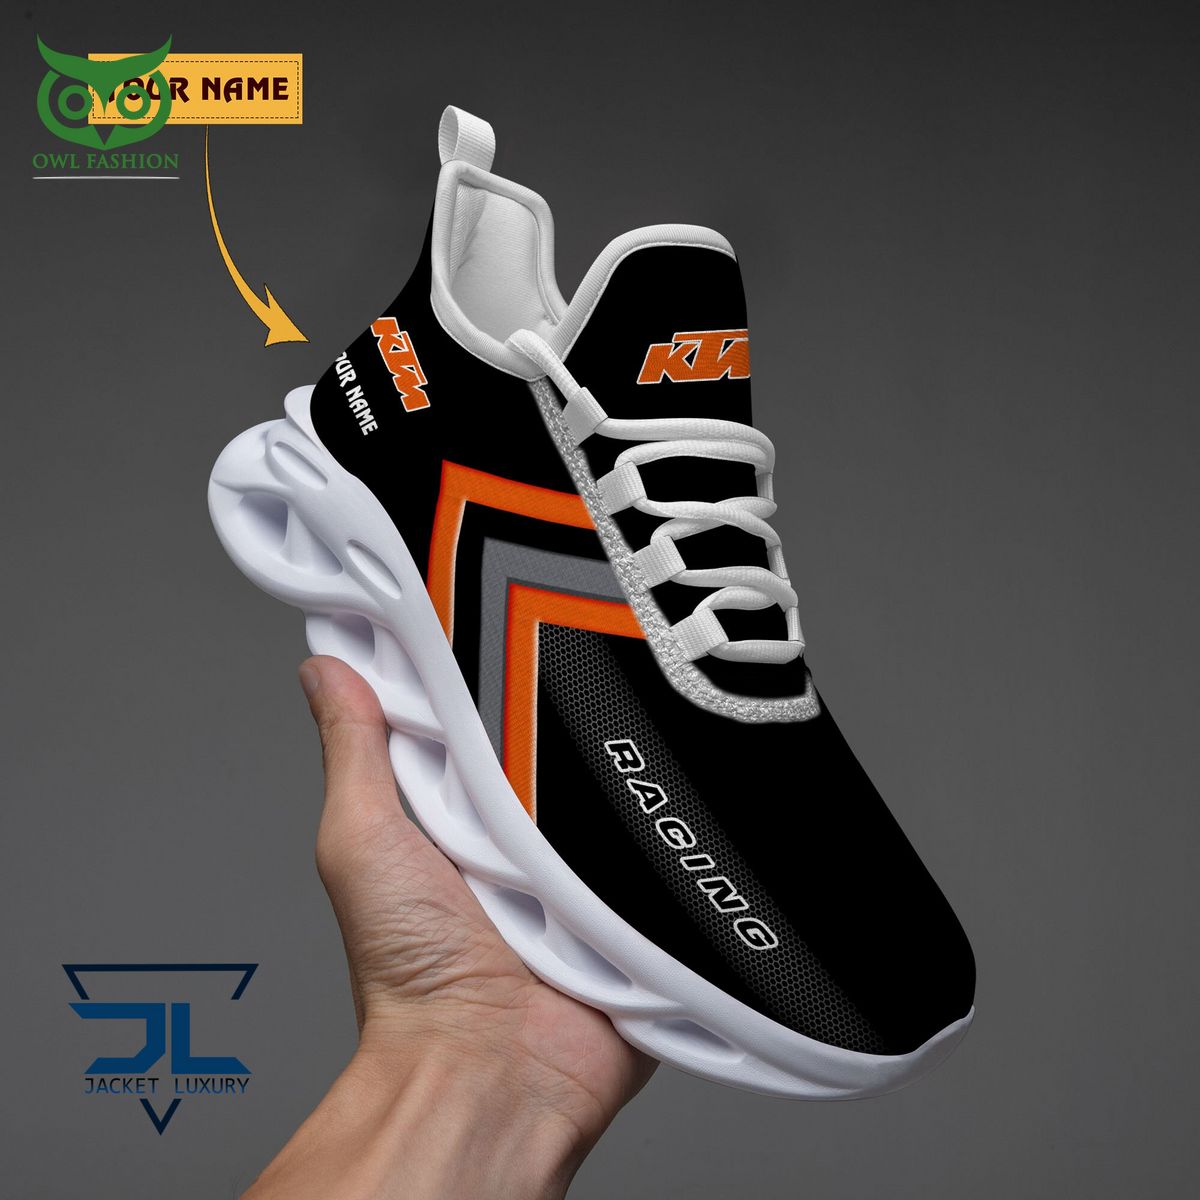 ktm automobile brand personalized max soul shoes 1 BIIHf